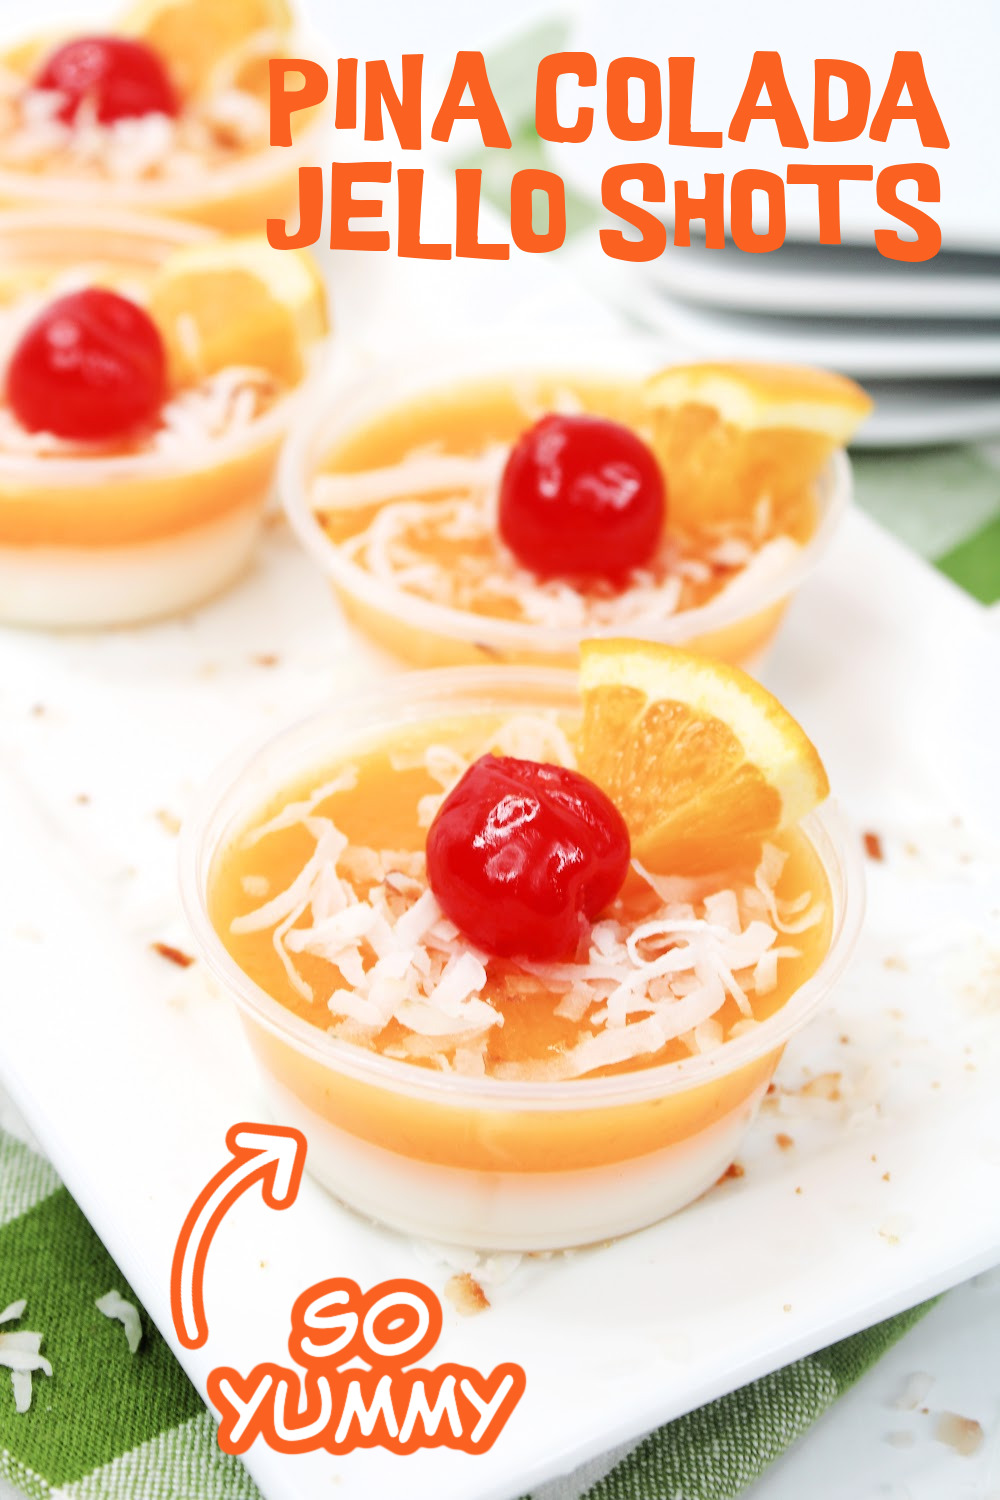 Pina Colada jello shots garnished with coconut and a cherry served on a white plate with a green checked napkin.